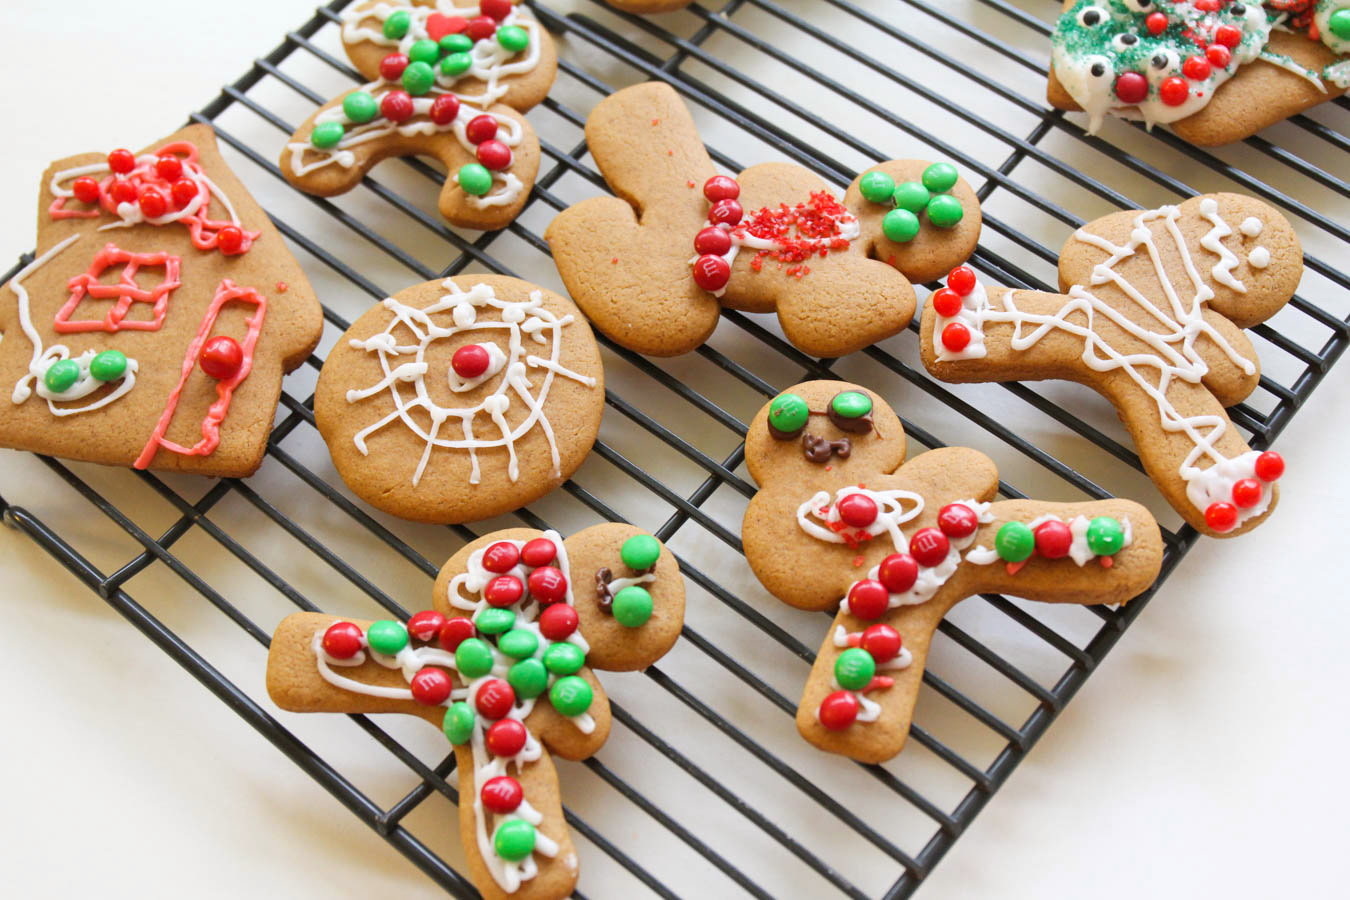 These basic gingerbread cookies are soft but sturdy and perfect for decorating!